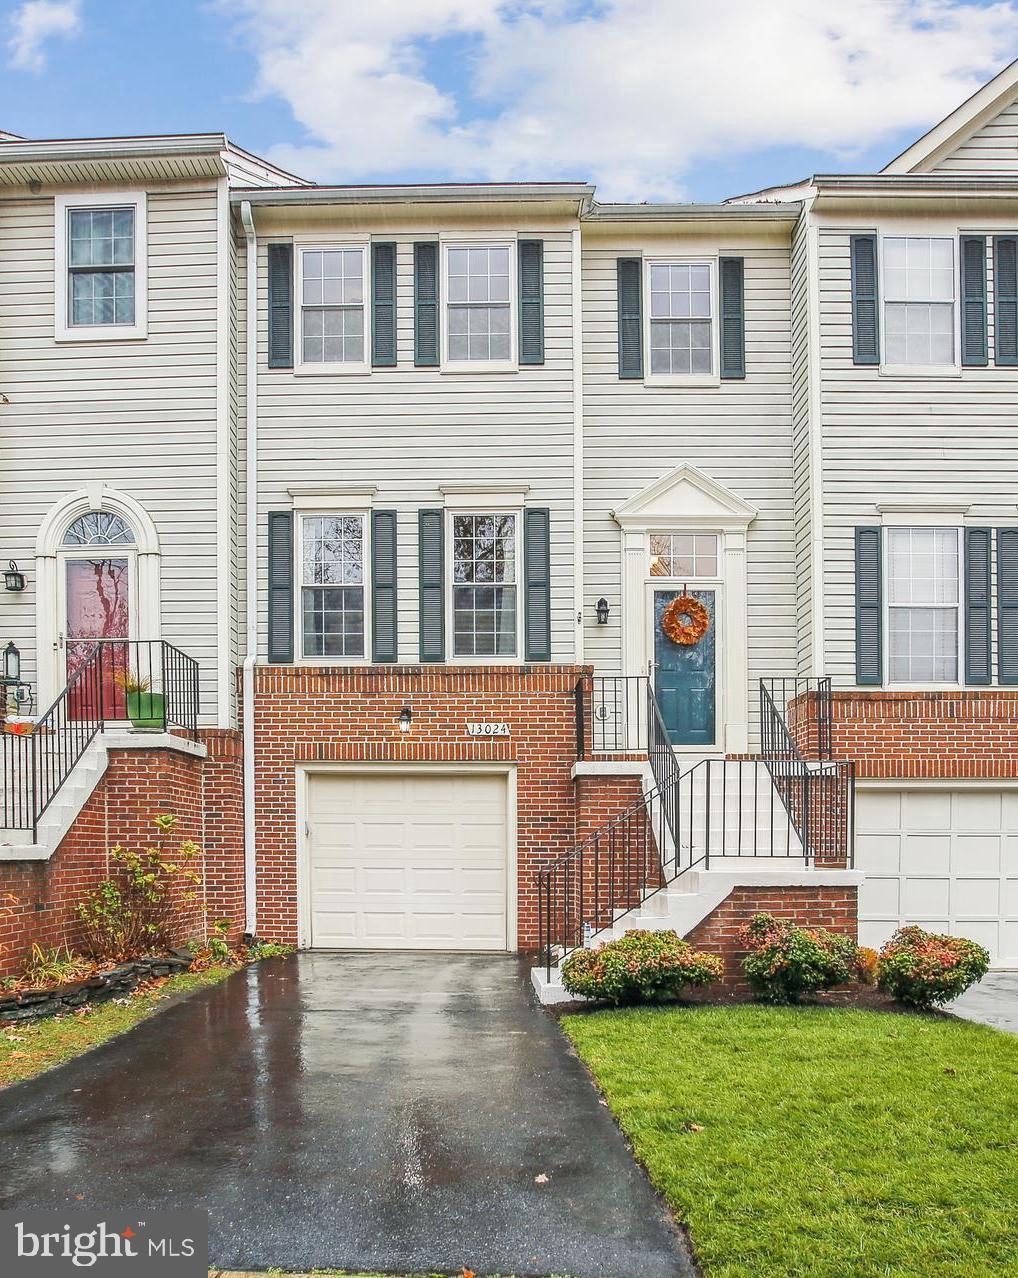 **Under contract** Open House for 11/26 canceled** Don't miss this rarely available  townhome  in sought after Hayden Village!  A stunning 3 level, interior unit with a one car front load garage and over 2100 square feet of well appointed living space.   Well maintained property with an array of updates and modern features , all tucked away on a quite cul-de-sac.  
Main level features NEW  LVT flooring,  fresh neutral paint, beautiful moldings, large windows and a bright and airy floor plan with spacious open concept living room and dining room, half bath,  an updated kitchen with light cabinets, recessed lighting, a NEW 5 burner gas stove and all stainless steel appliances, Corian counters and eat in kitchen. The large slider off the kitchen leads you to the freshly painted deck with stairs and the lower level patio area all backing to woods!
The upper level has all NEW carpet and  the spacious primary suite with walk in closet that has storage system and luxurious remodeled bath with a 2 sink vanity and  large shower. There are  2 additional bedrooms and a second full updated bathroom with larger size soaking tub and shower combination.
The fully finished walk out lower level offers even more living space with a large family room (recreation room) with gas fireplace, a storage and utility room, laundry and entrance from garage and can access patio off the rear with NEW sliding door.  Over $40k in upgrades and improvements. **1 year Home Warranty offered to buyer!
Community amenities include pool, tot lot, tennis courts and walking paths. Great schools,
The neighborhood is located just minutes from George Mason University, the Town of Clifton, the Stringfellow Park & Ride, major commuter routes such as I66/Fairfax County Parkway/ Rt.29/28,  and Fair Lakes. Fair Oaks, Fairfax Corner, Costco, Wegmans and many other shopping, dining and entertainment options.